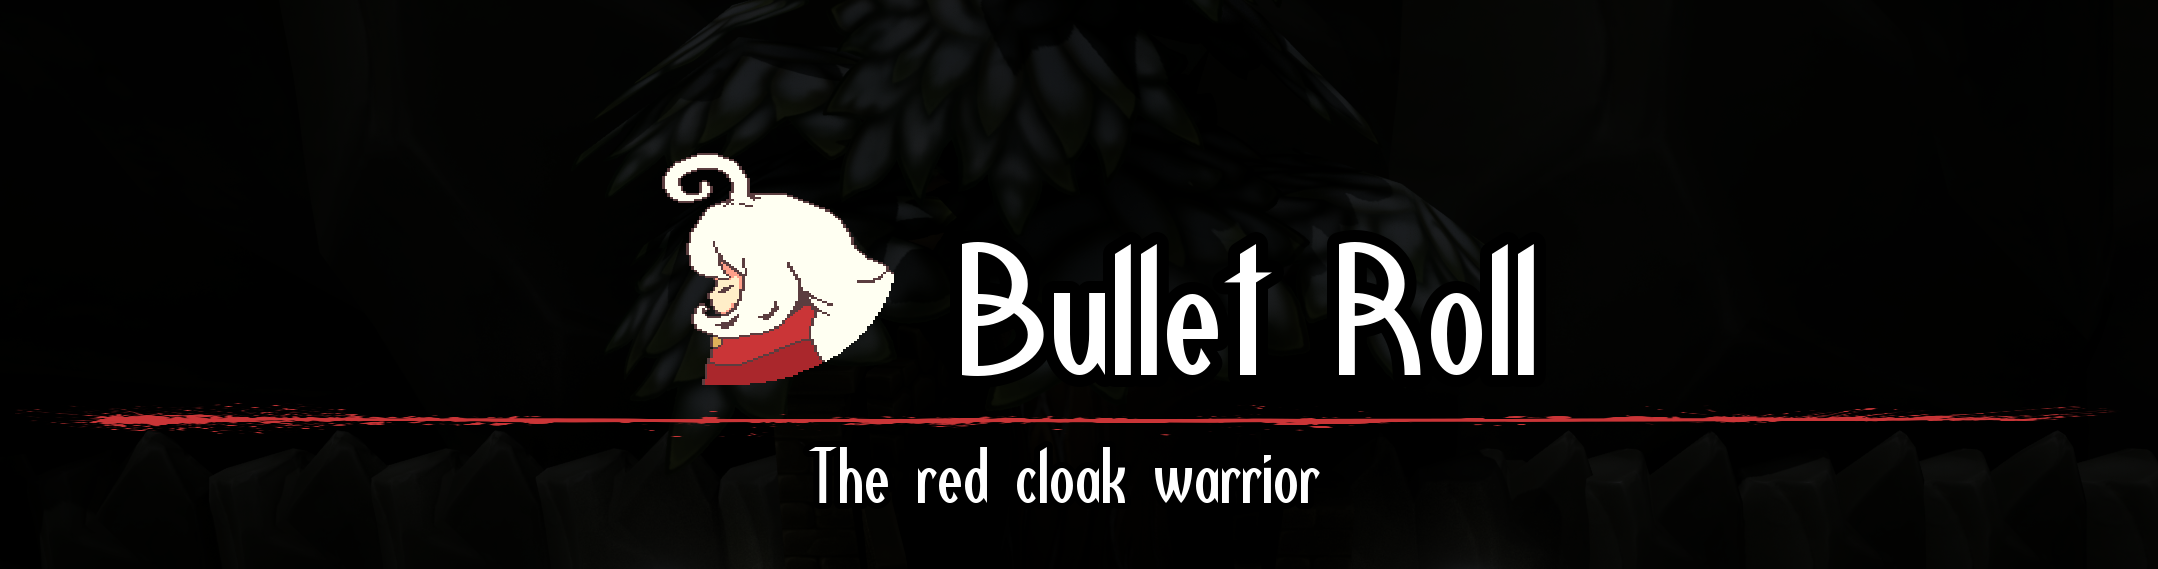 Bullet Roll - The red cloak warrior